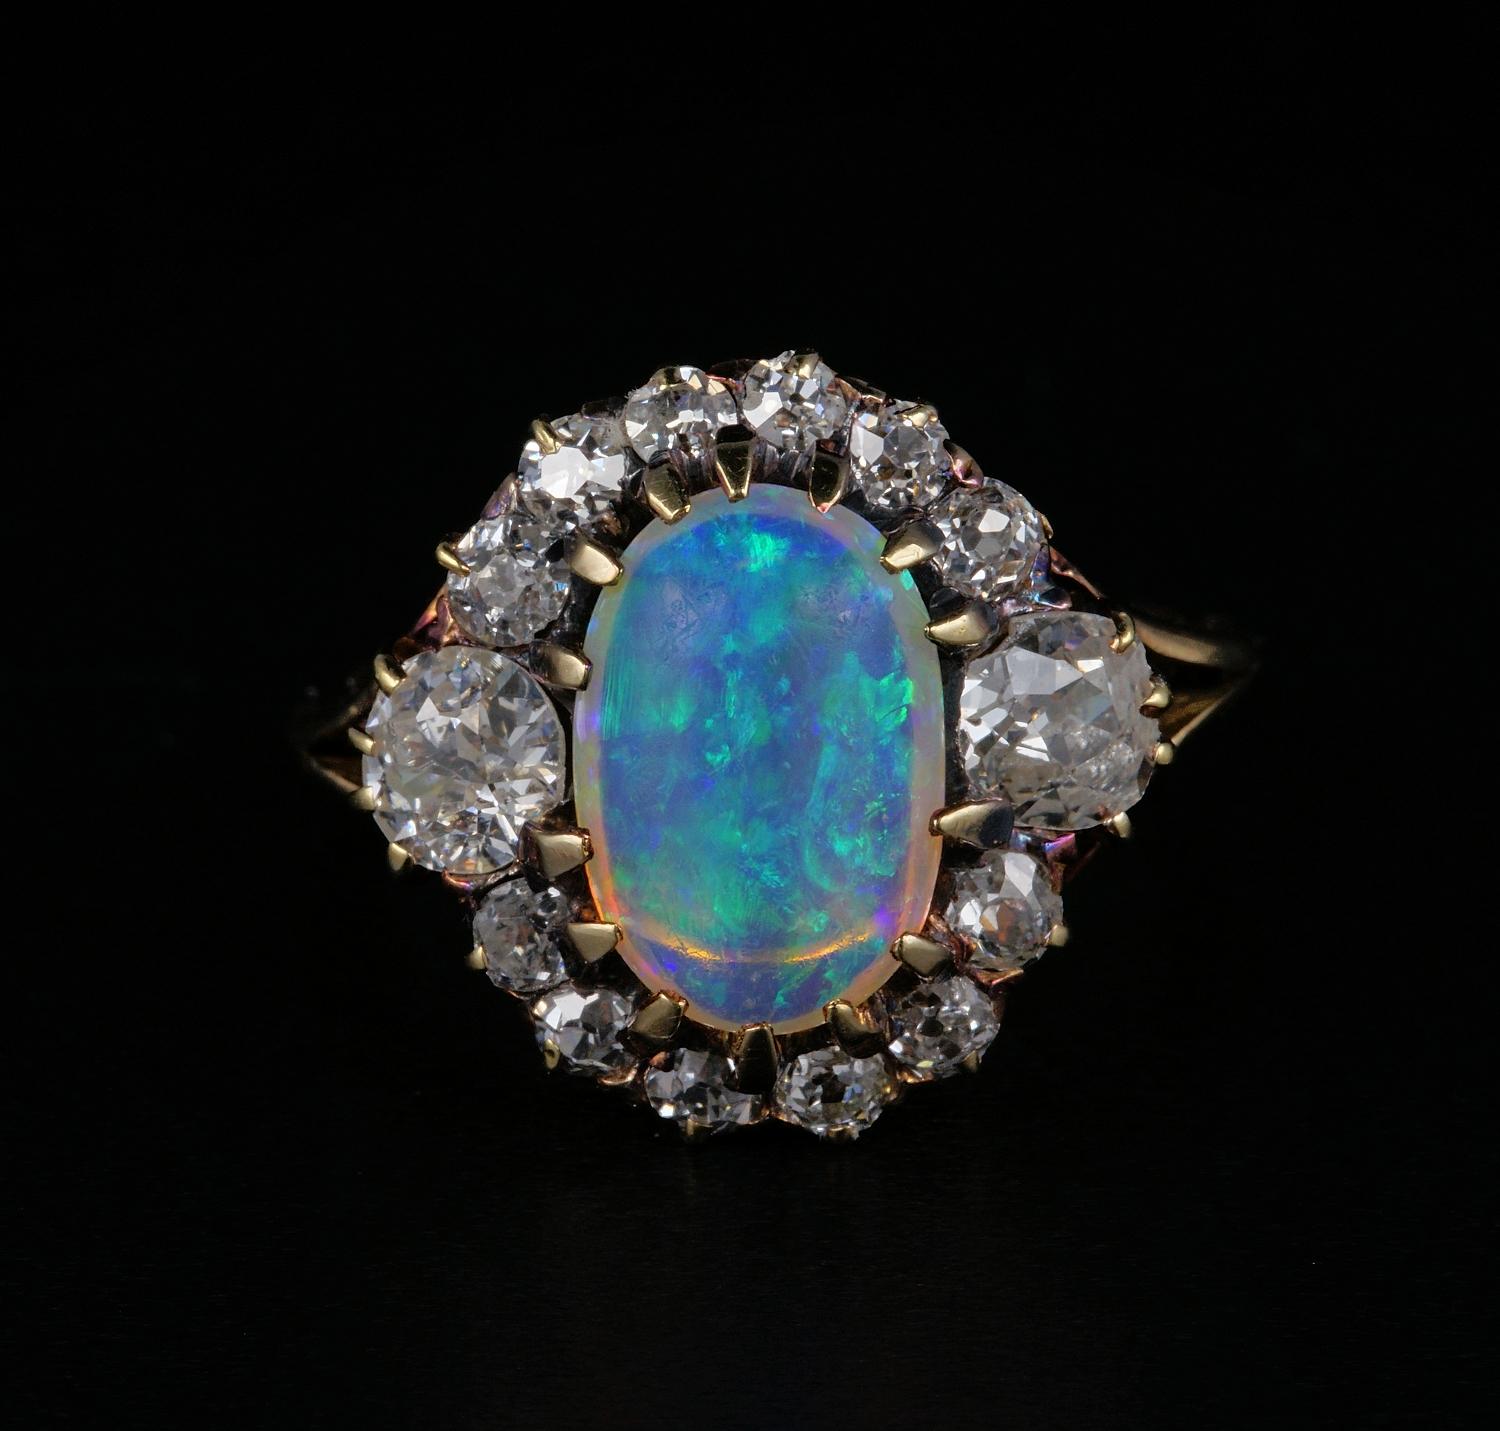 Scarce, hard to find, distinctive Opal ring from the Victorian period are sought after worldwide. This striking Victorian example is one of the more beautiful indeed.
English origin, 1880 ca, it has it all! Charming oval design with two large side